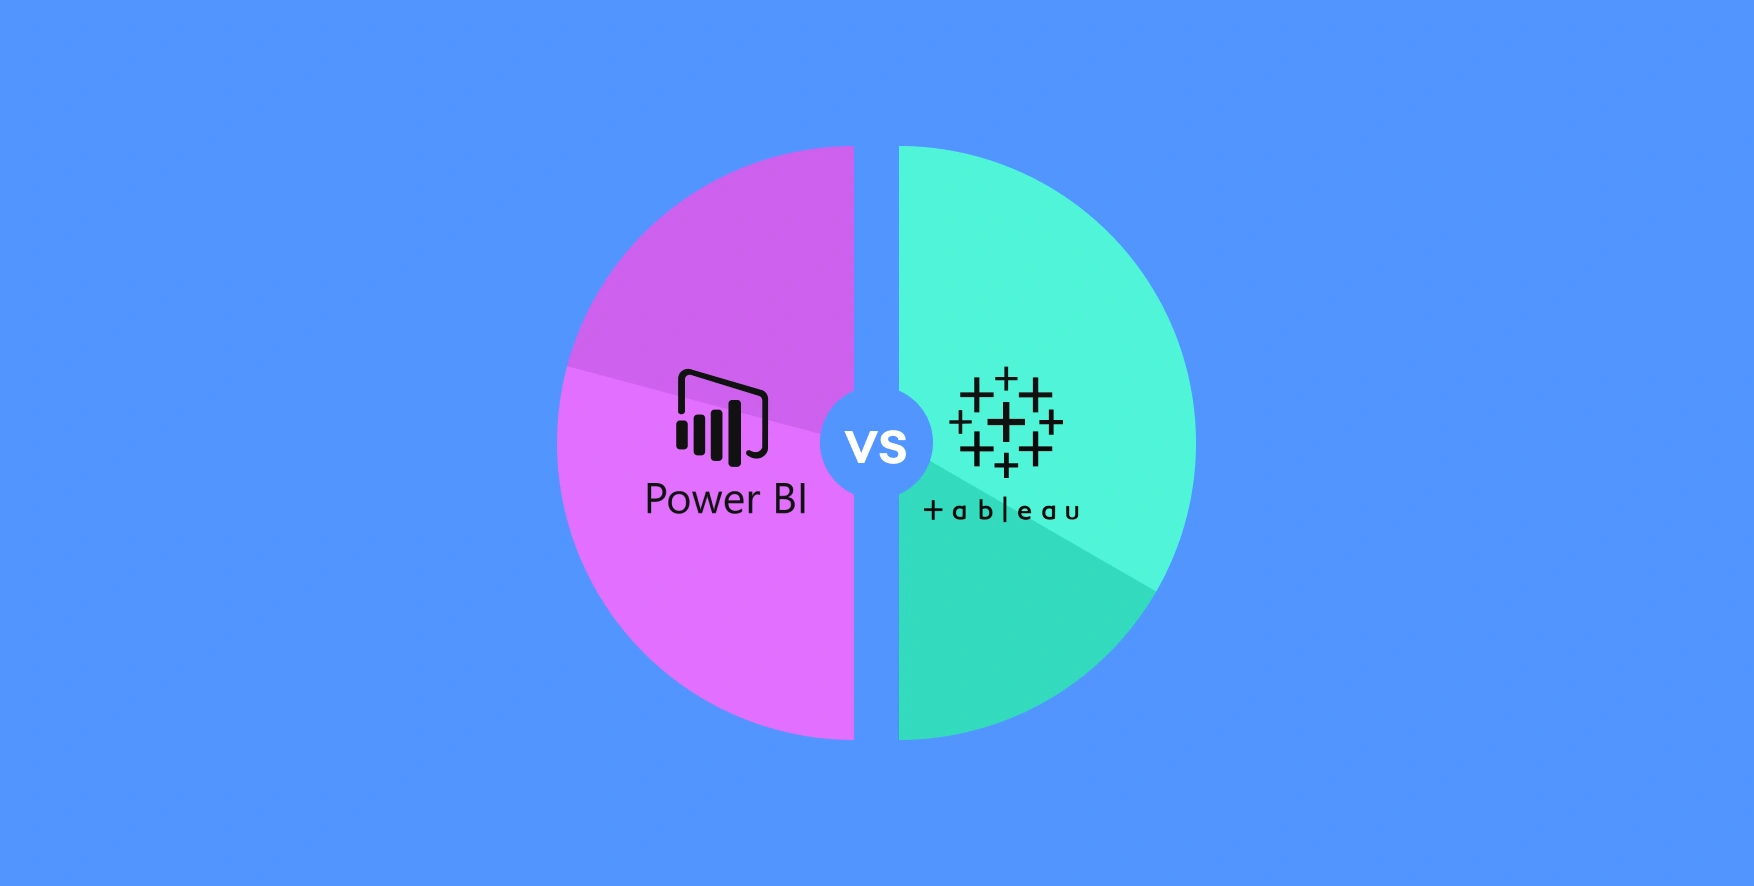 Power BI vs Tableau on two sides of the circle